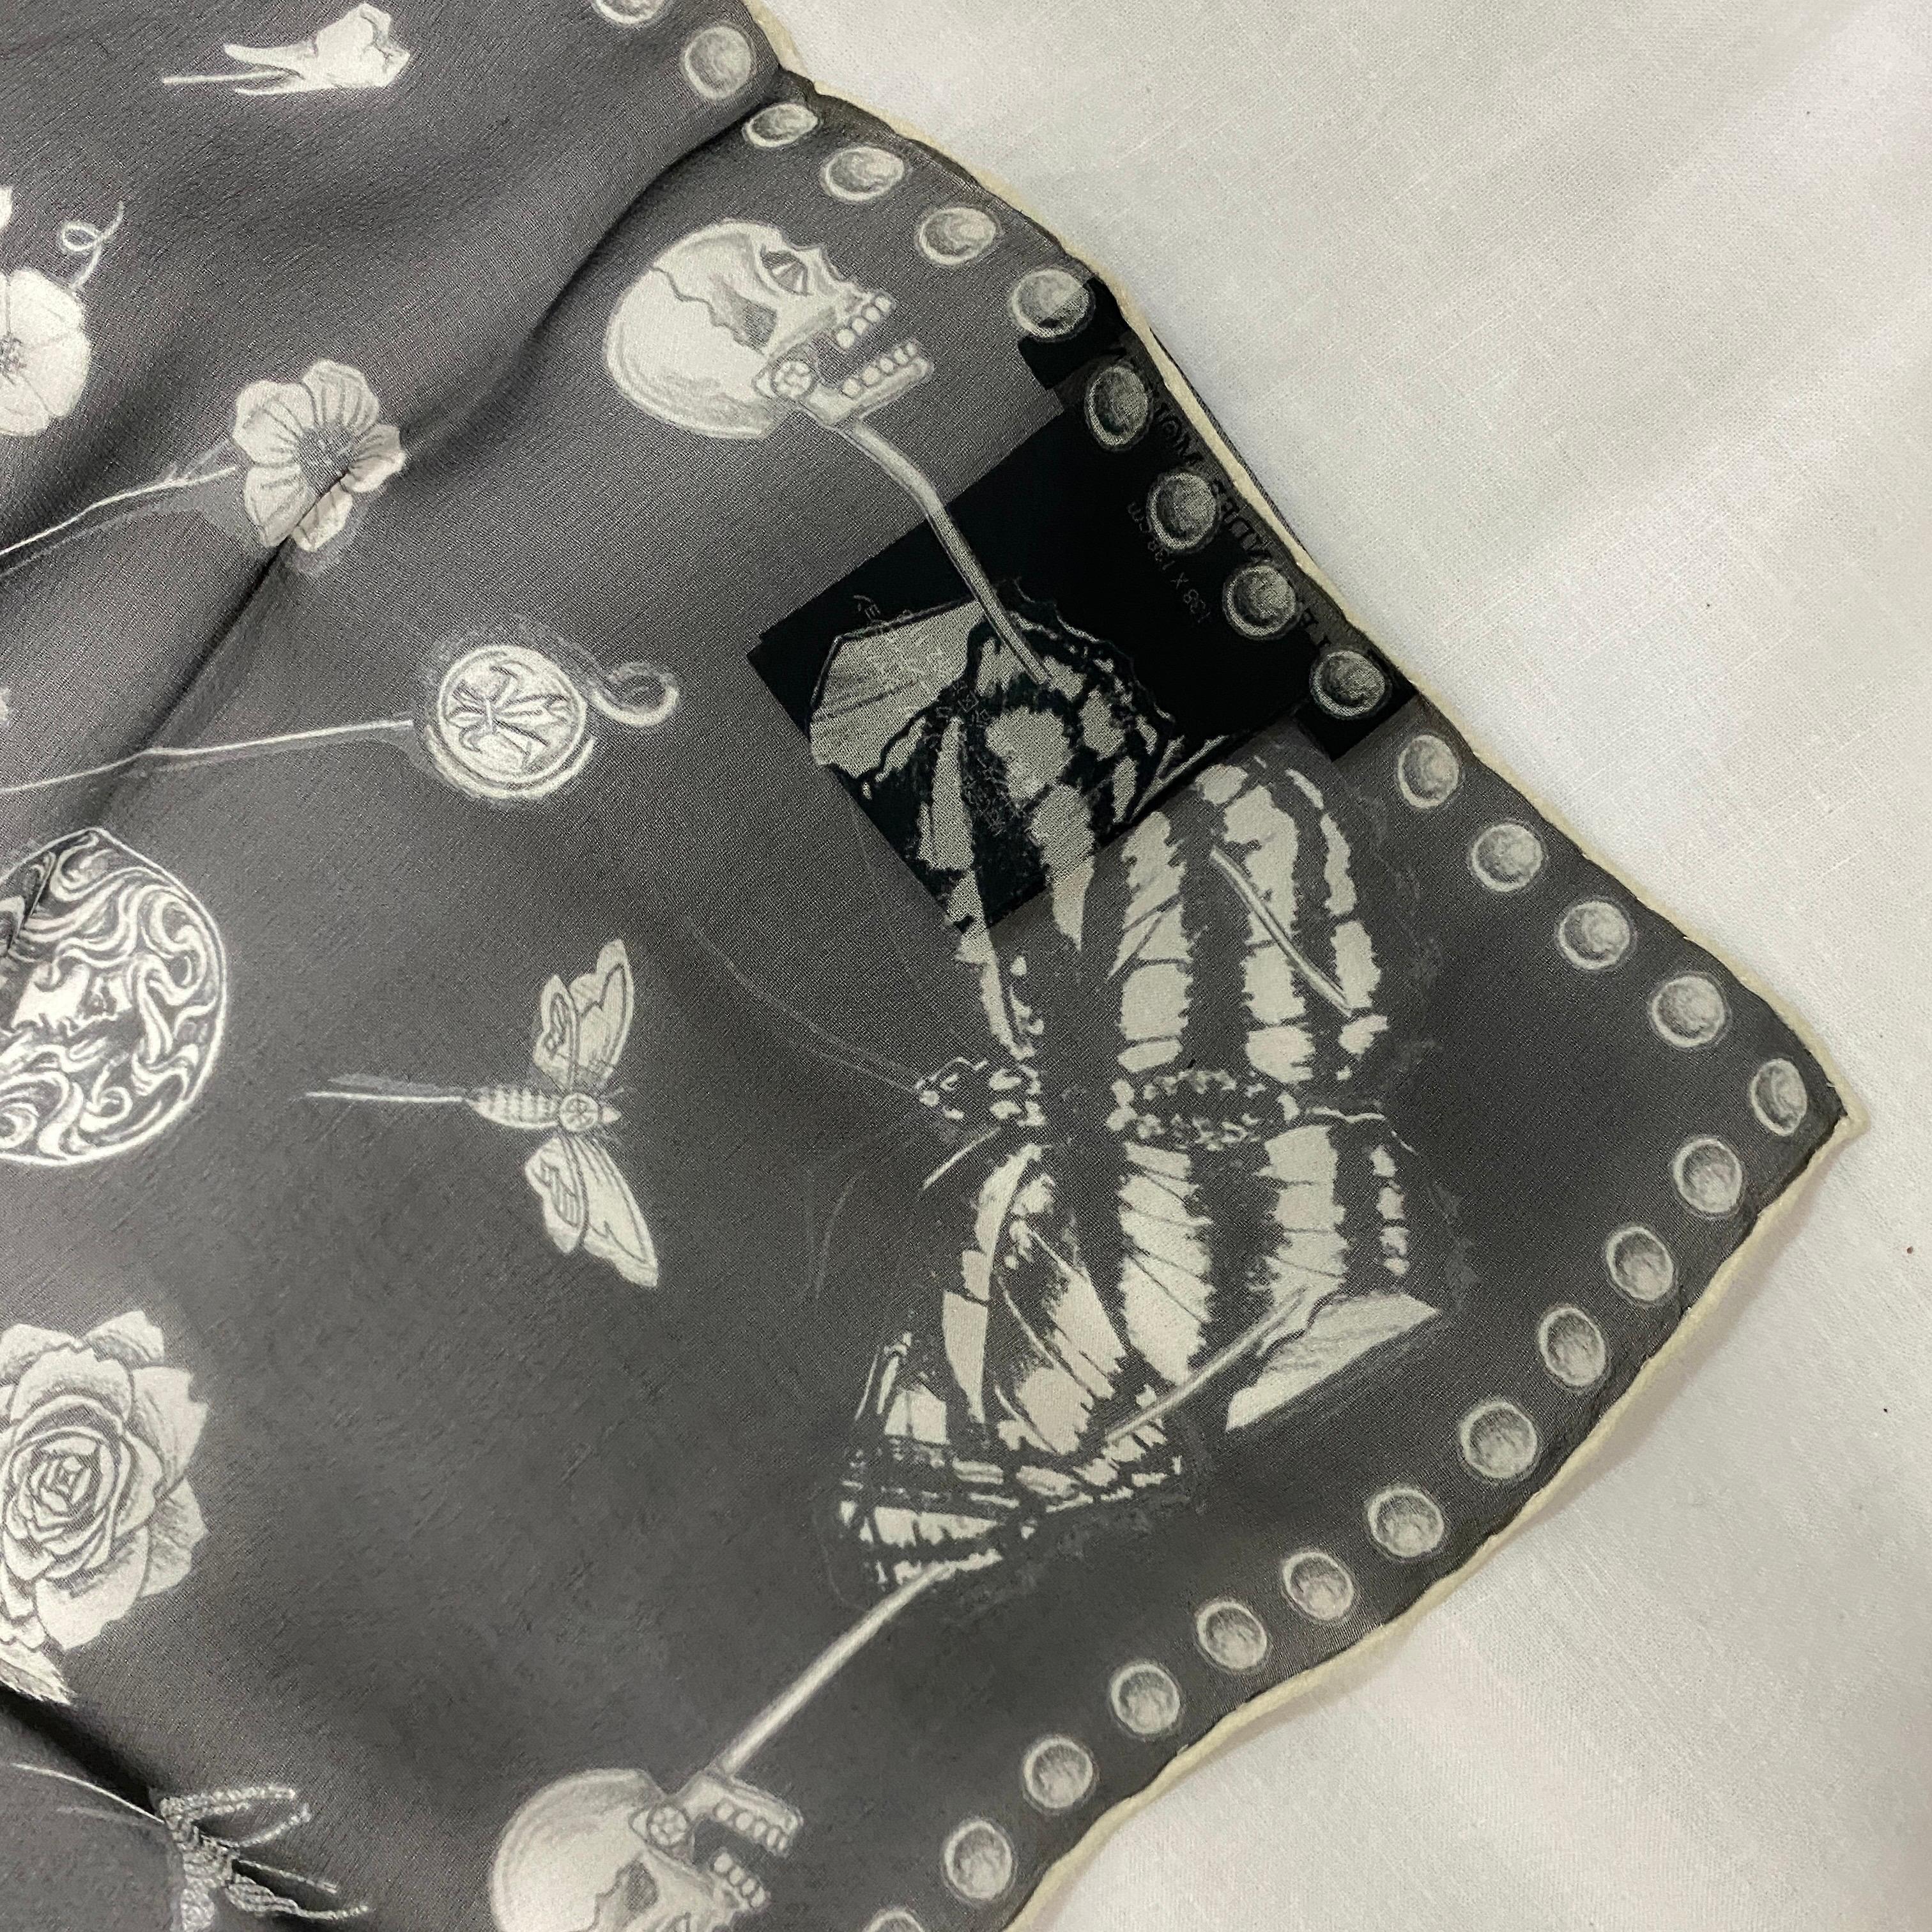 Iconic Black and White Silk Scarf by Alexander McQueen, with central Skull 1